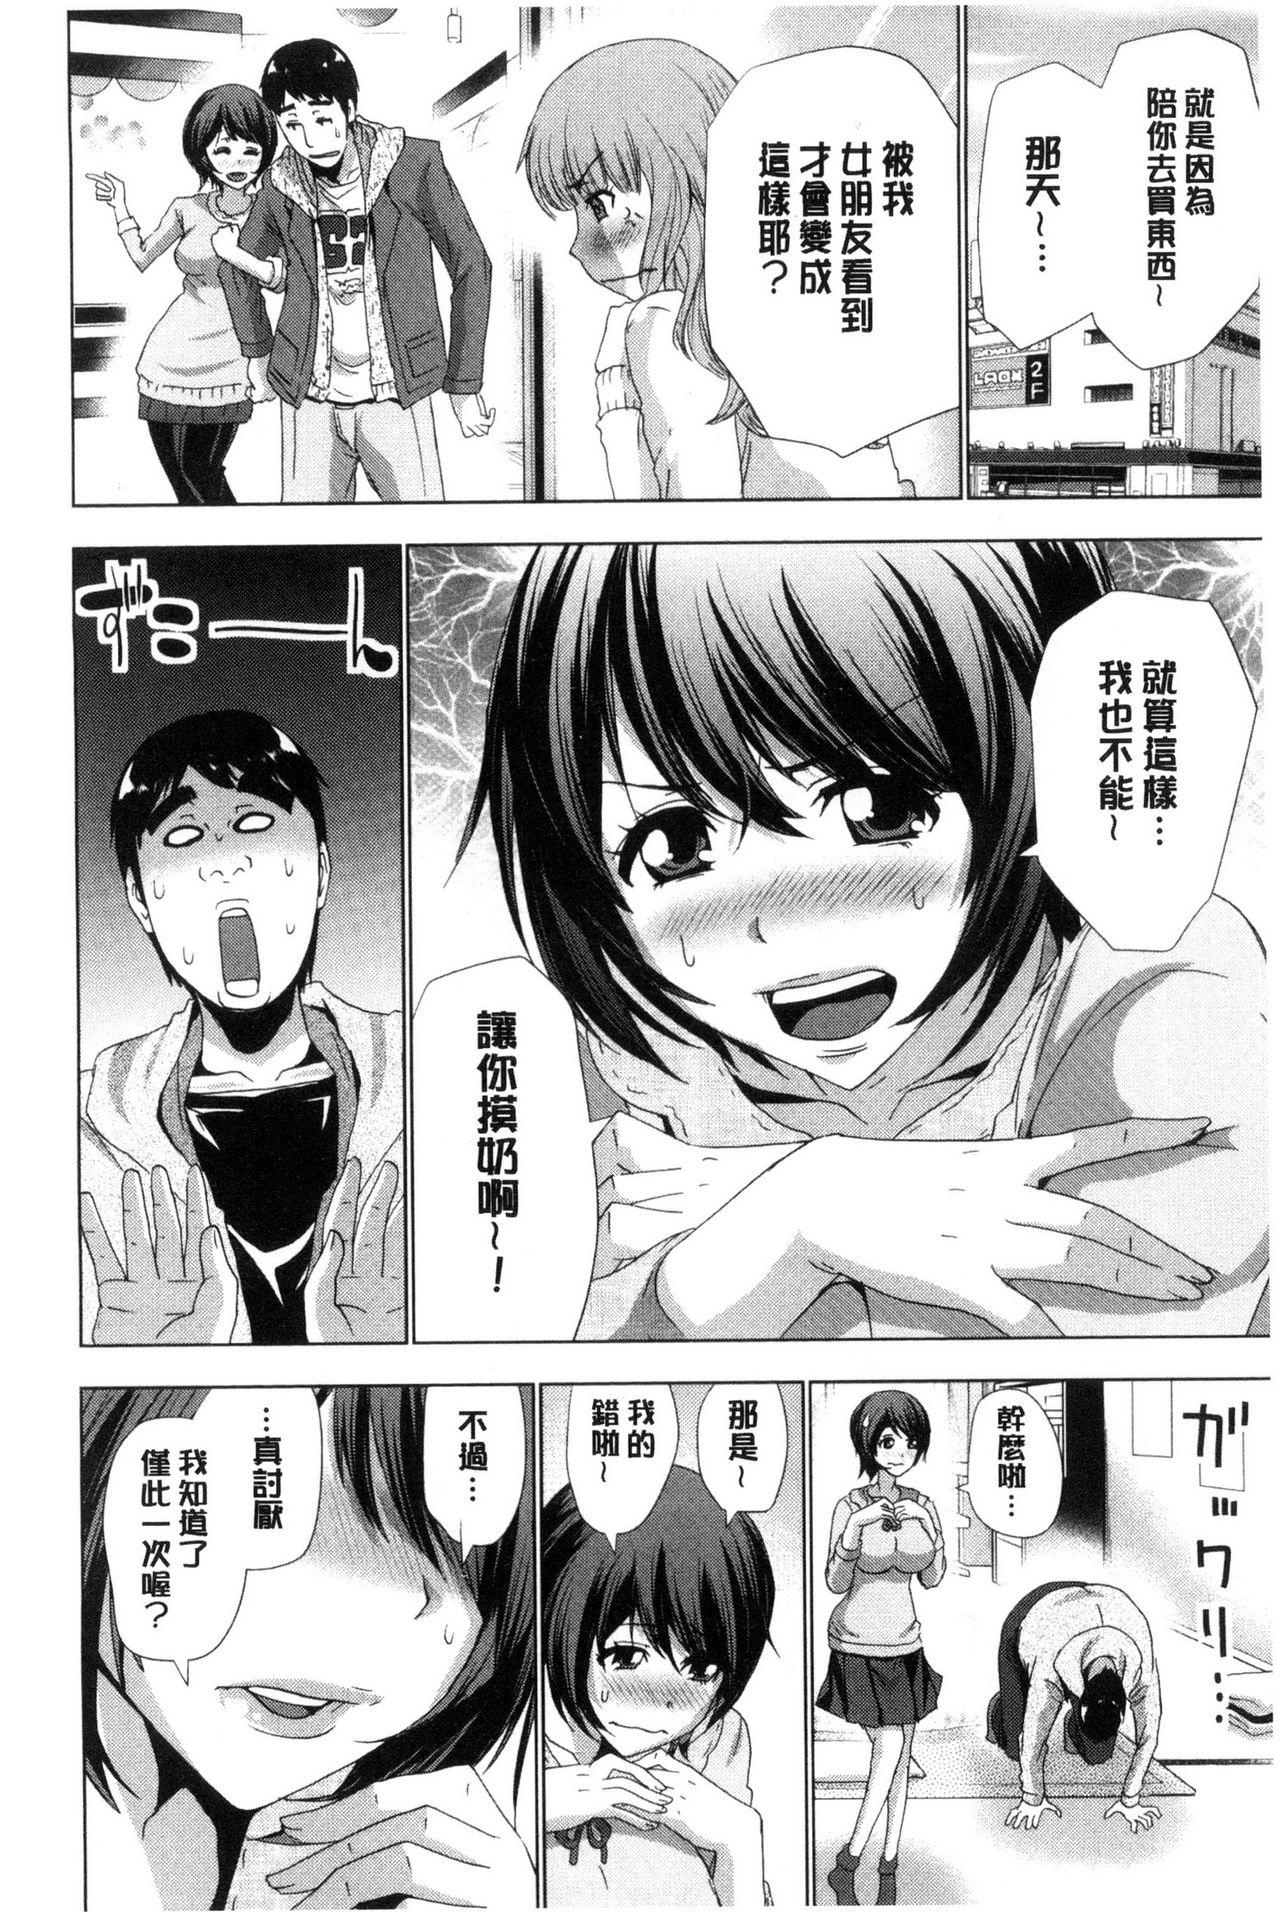 Hunk Dogeza Oppai! | 跪下來仰望美乳! Wives - Page 11